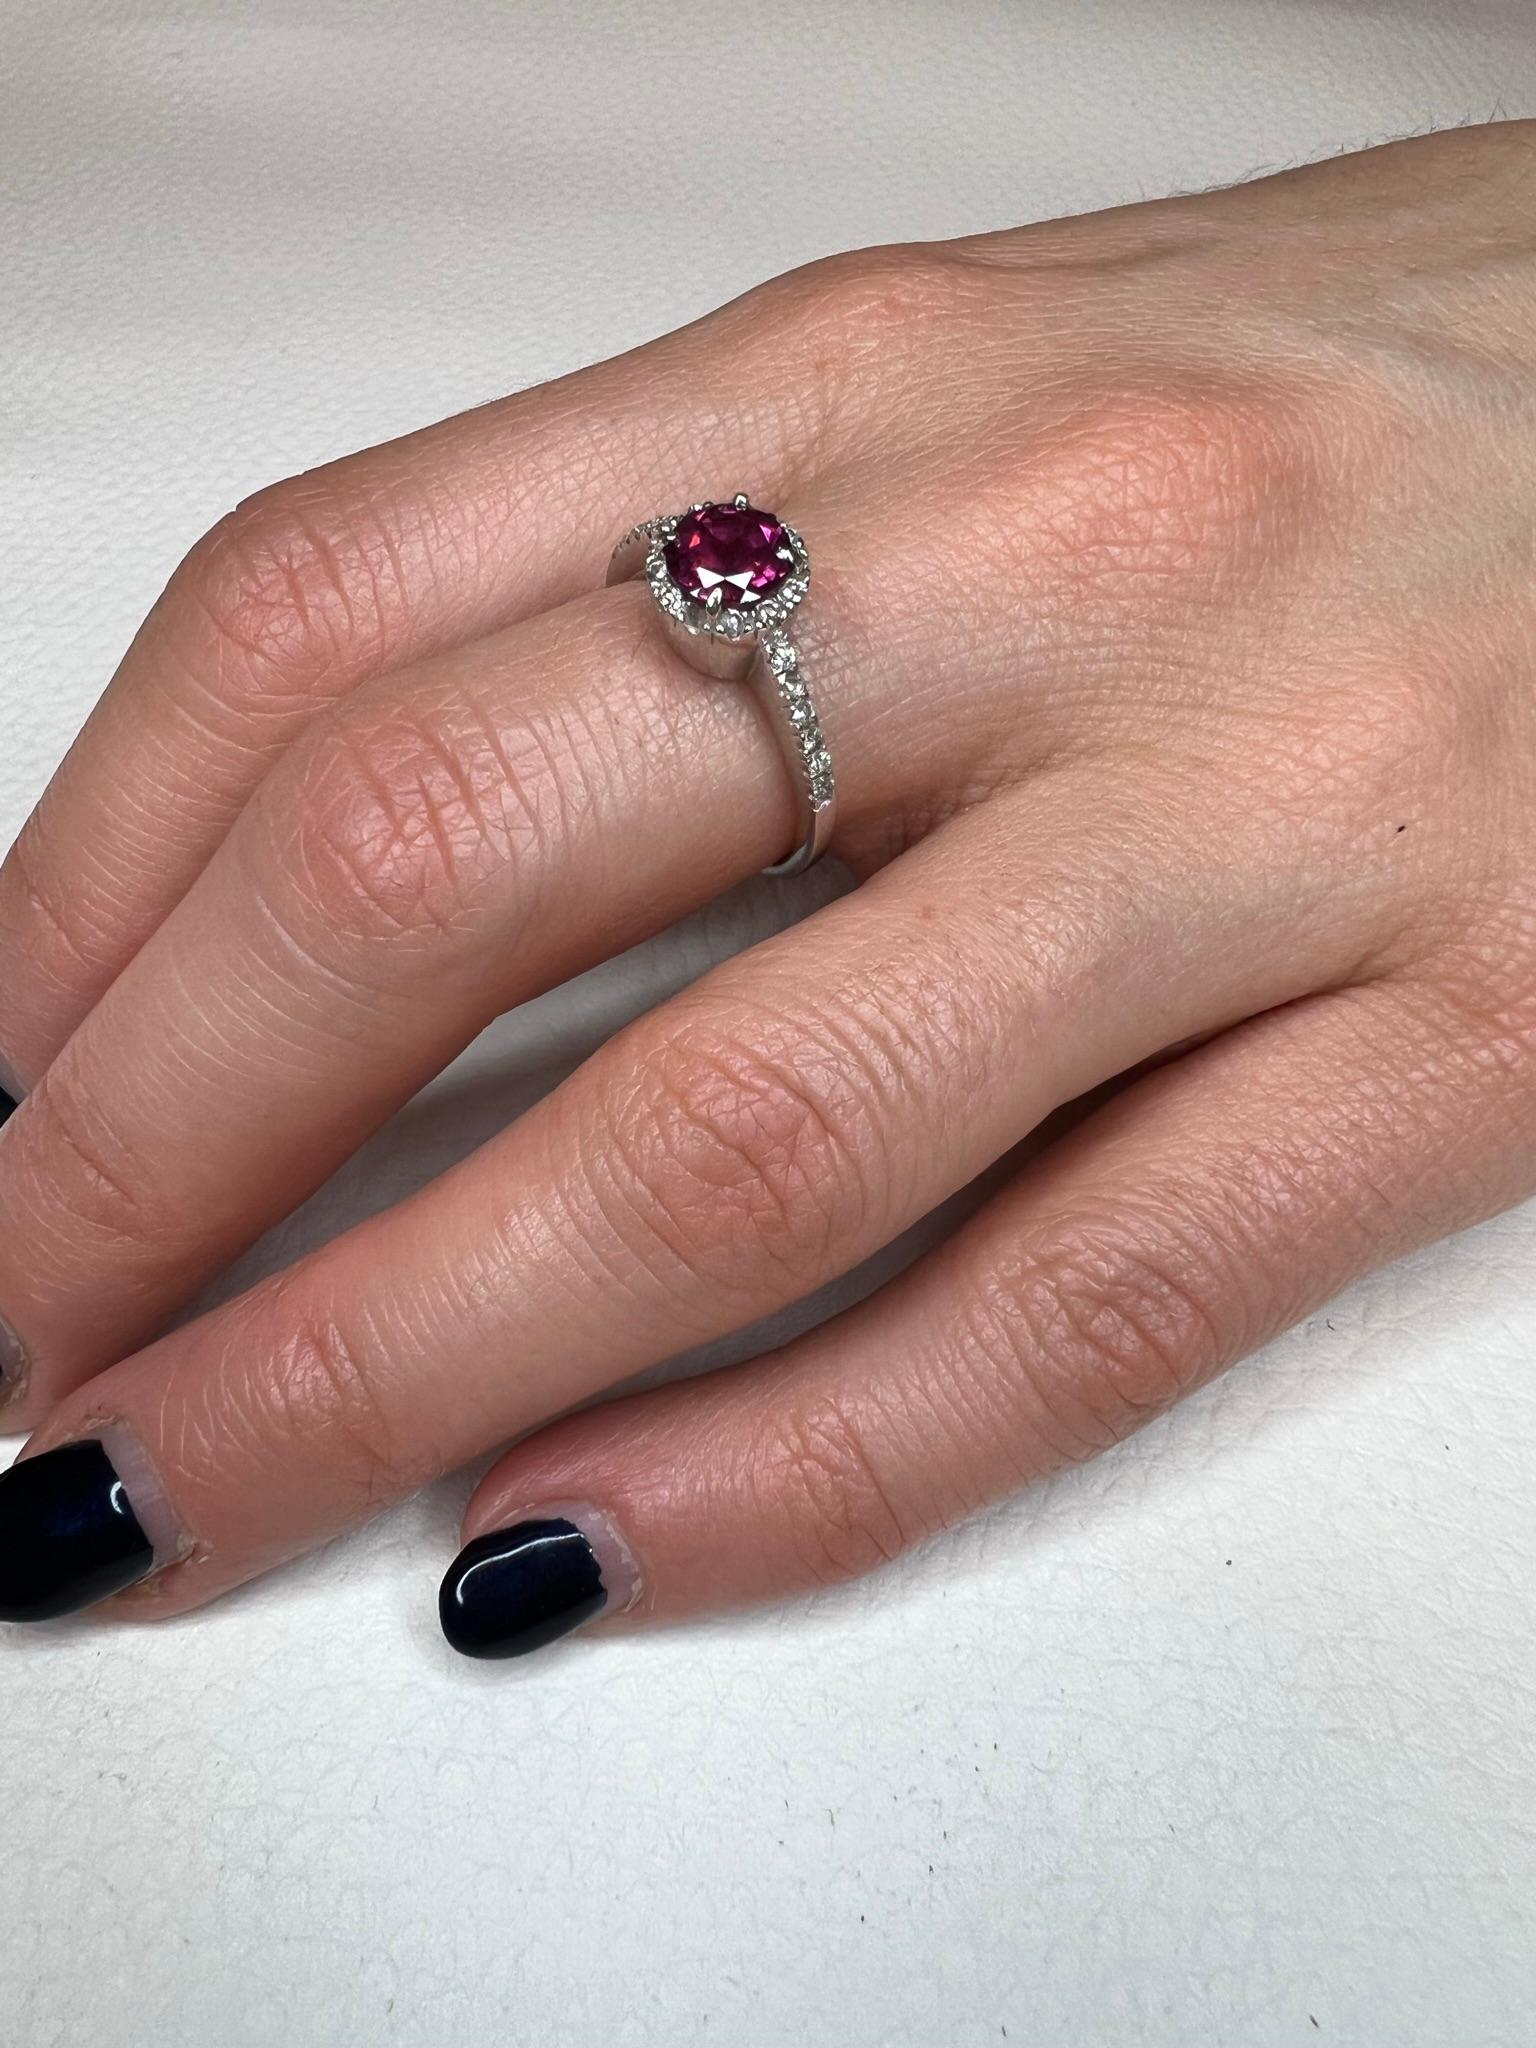 modern, classic, suitable for any occasion.    Pretty ring in 18kt gold with White Diamonds Cts 0,25  Stone : Tourmaline round cut mm 5,70 

Ring size : 14 - 54   USA 7  g.4,00

All Stanoppi Jewelry is new and has never been previously owned or